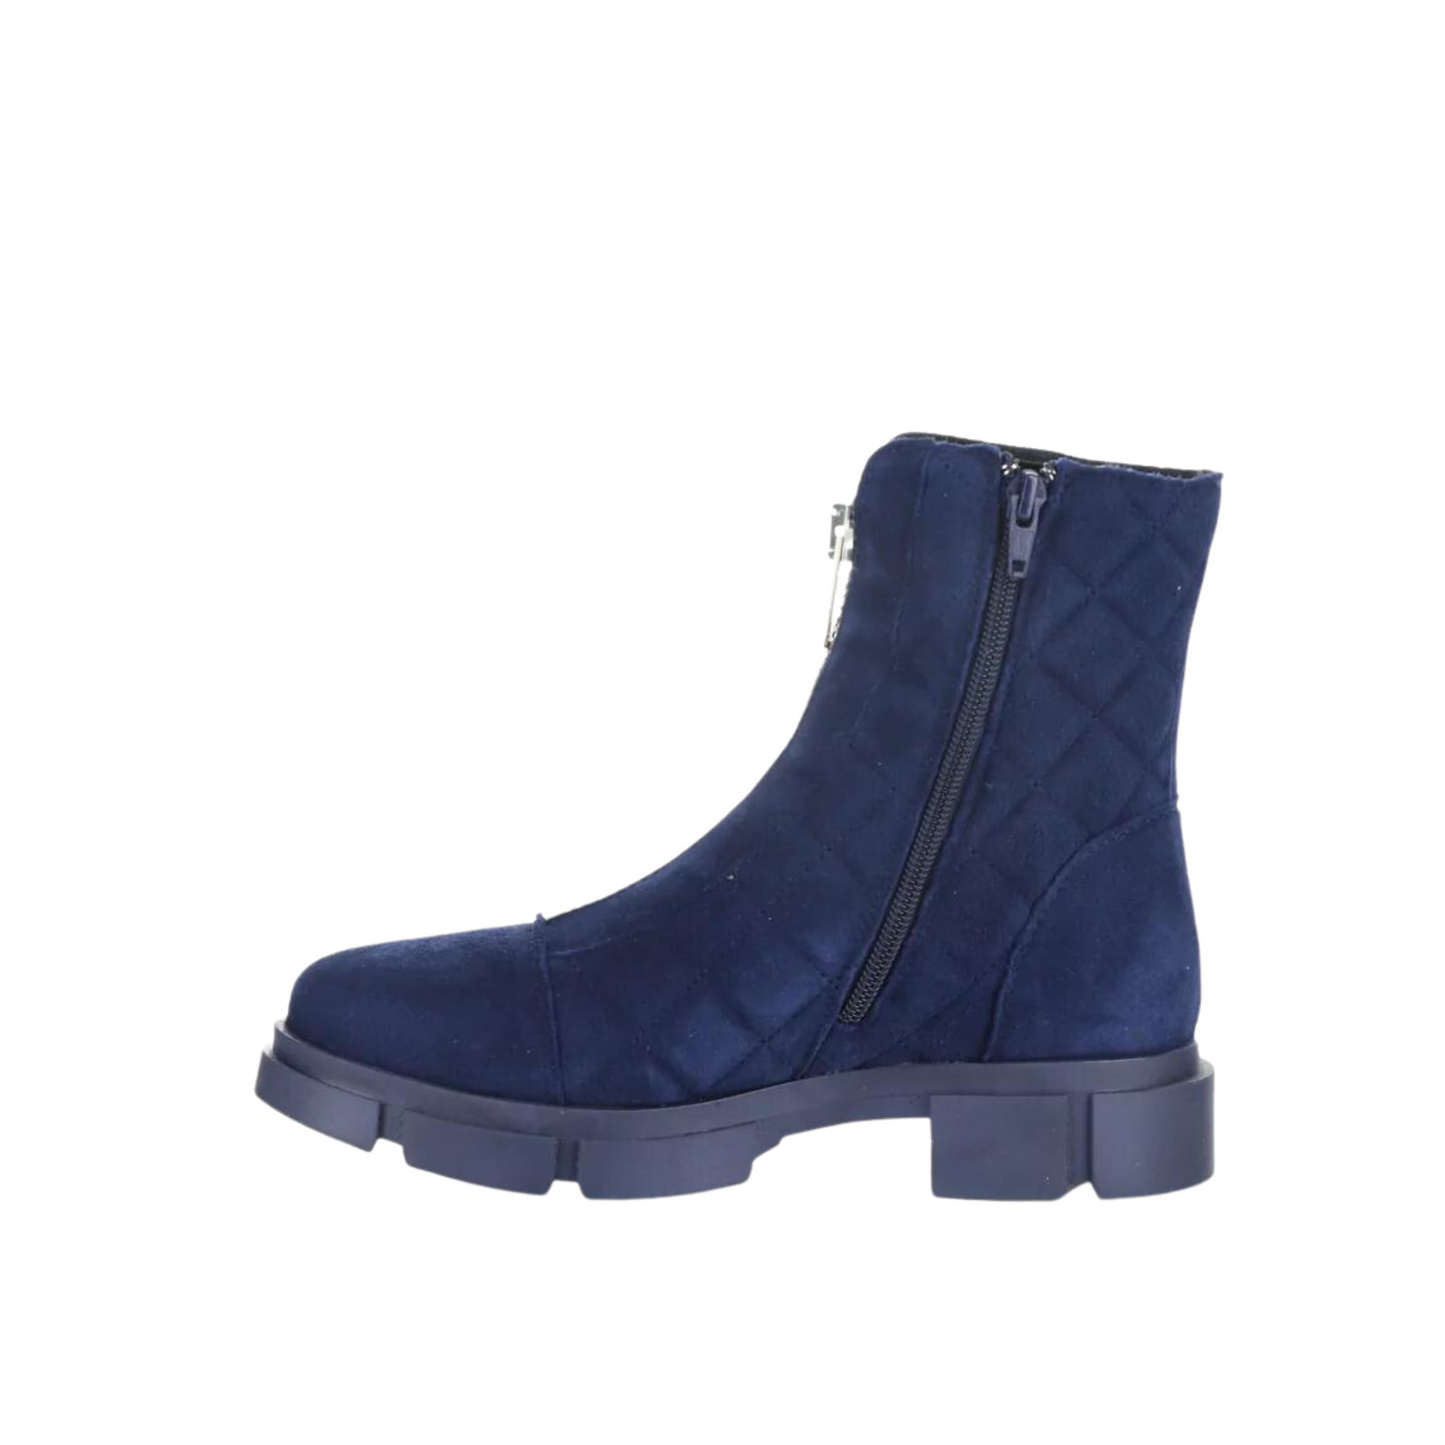 Left side profile of the Bos & Co. Lane Boot in the colour Navy.